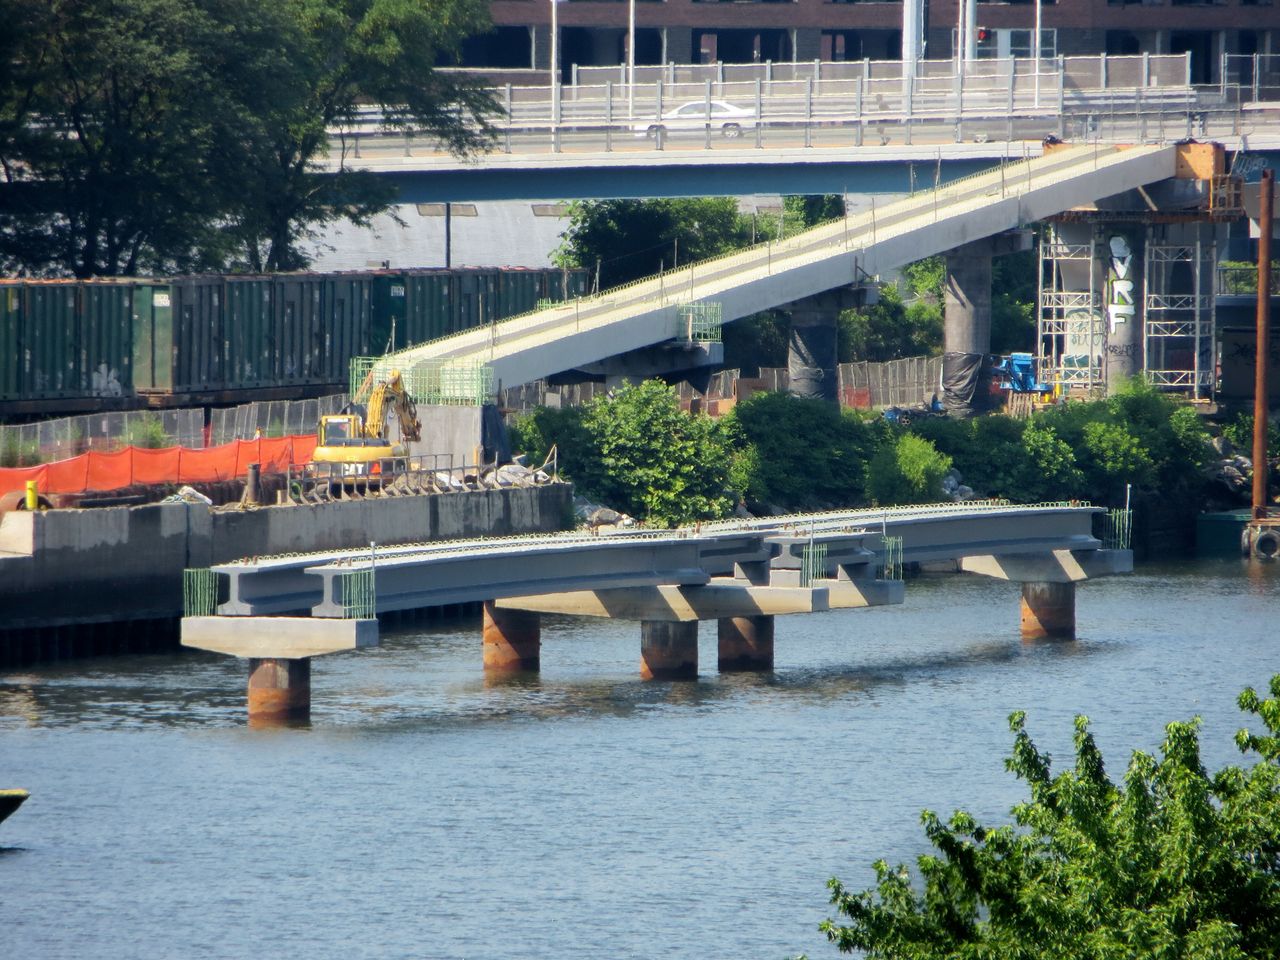 The boardwalk will feed into the ramp at the base of the South Street Bridge